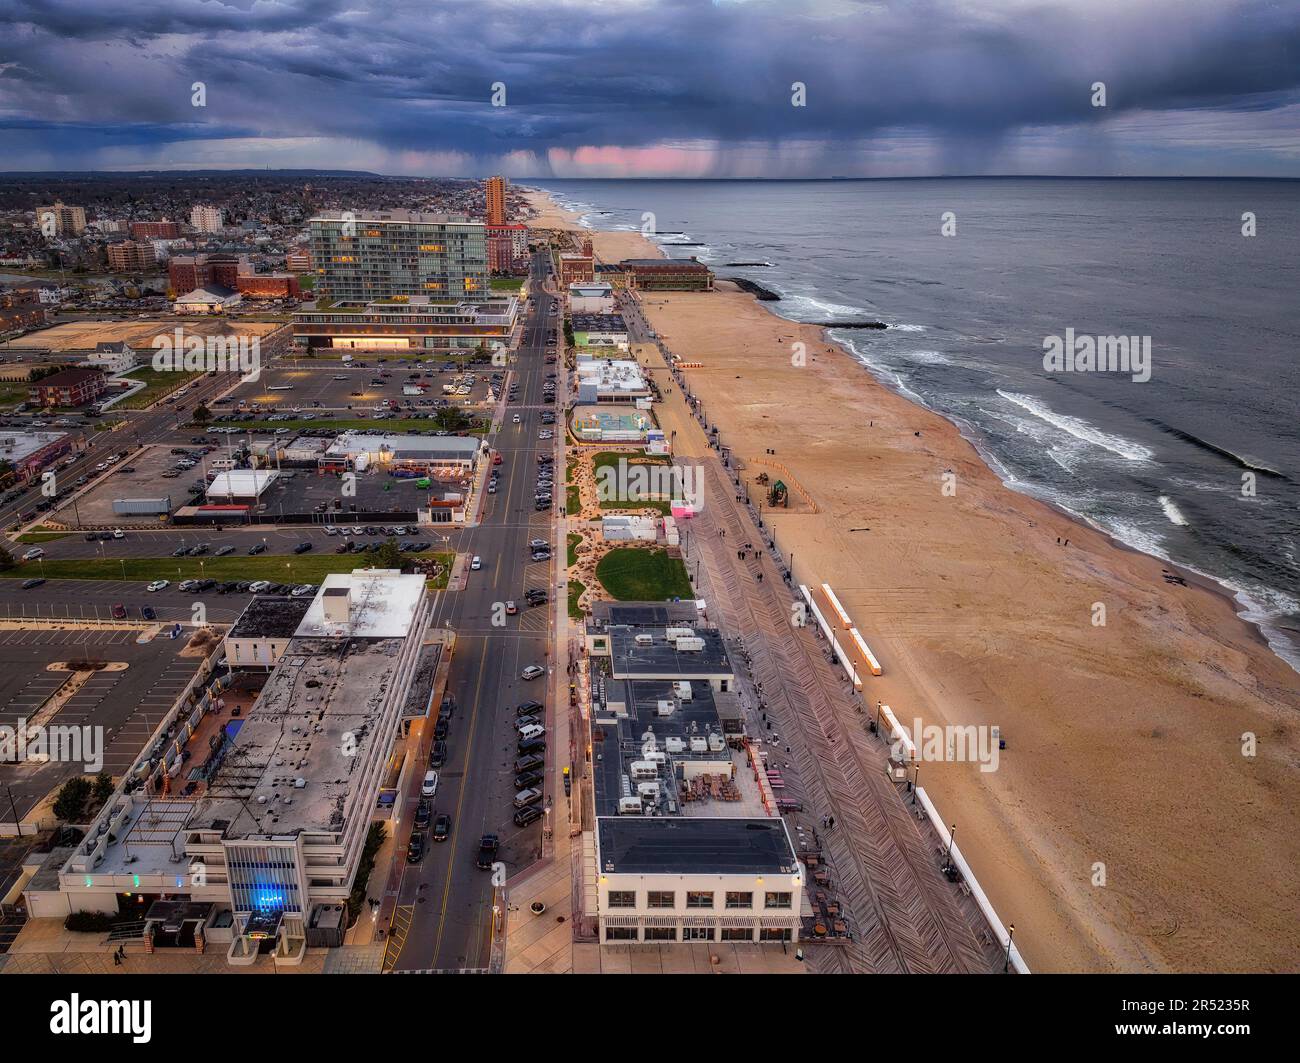 Asbury Park Boardwalk Aerial NJ - Aerial view of the boardwalk at Asbury Park Beach with a stormy sky over the New York City area.  This image is avai Stock Photo